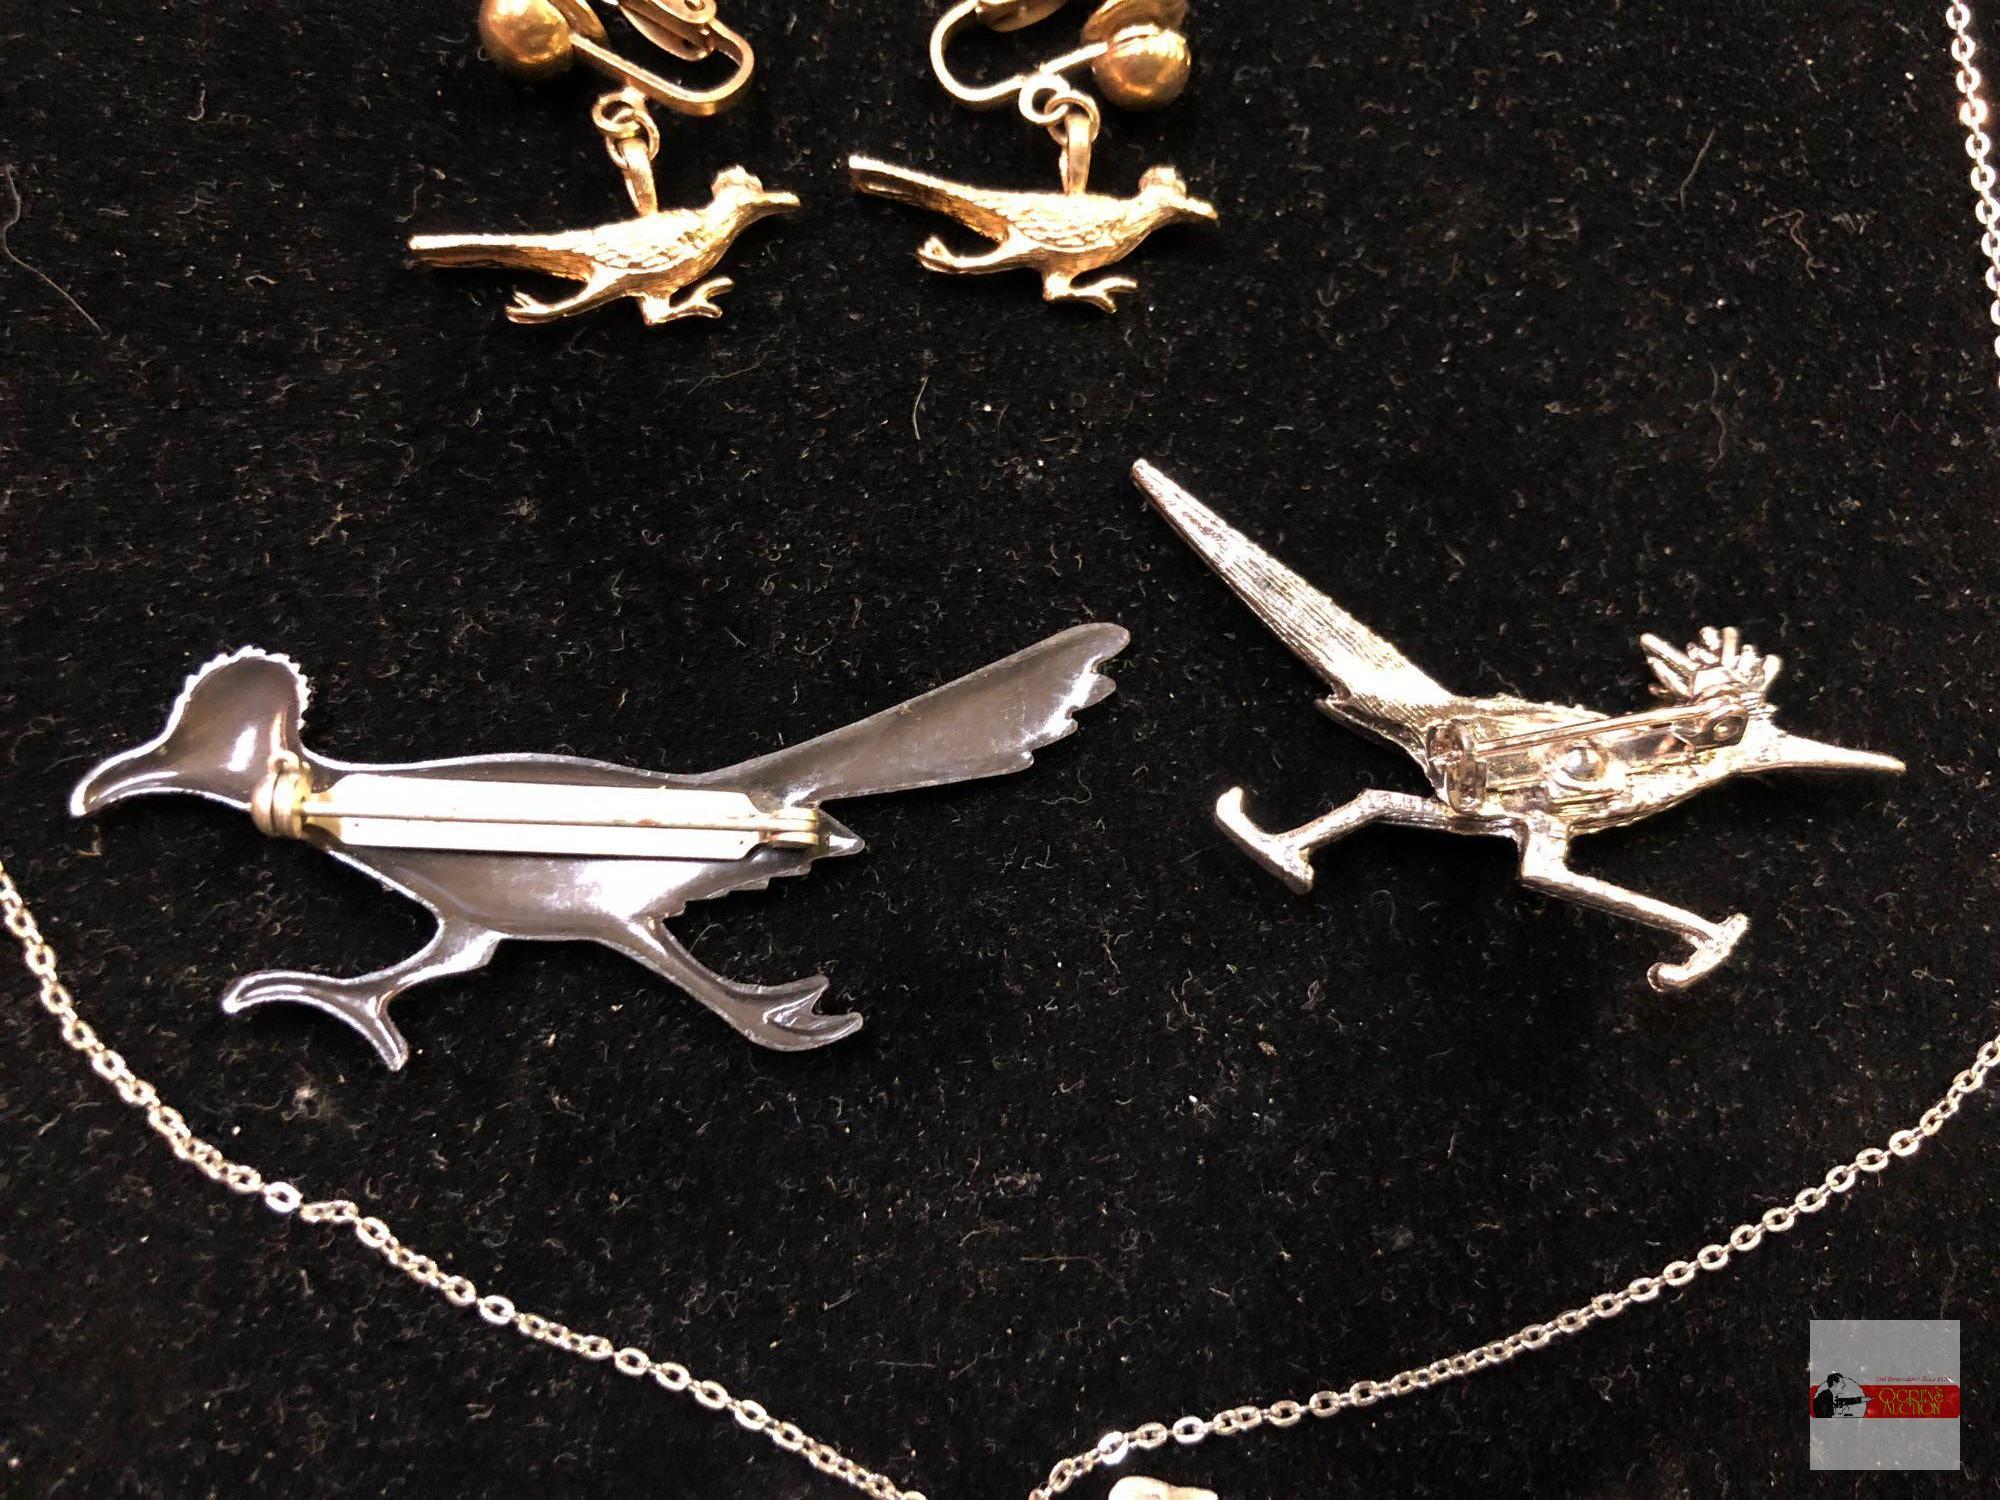 Jewelry - Roadrunner parure set - pendant, necklace, brooches, earrings